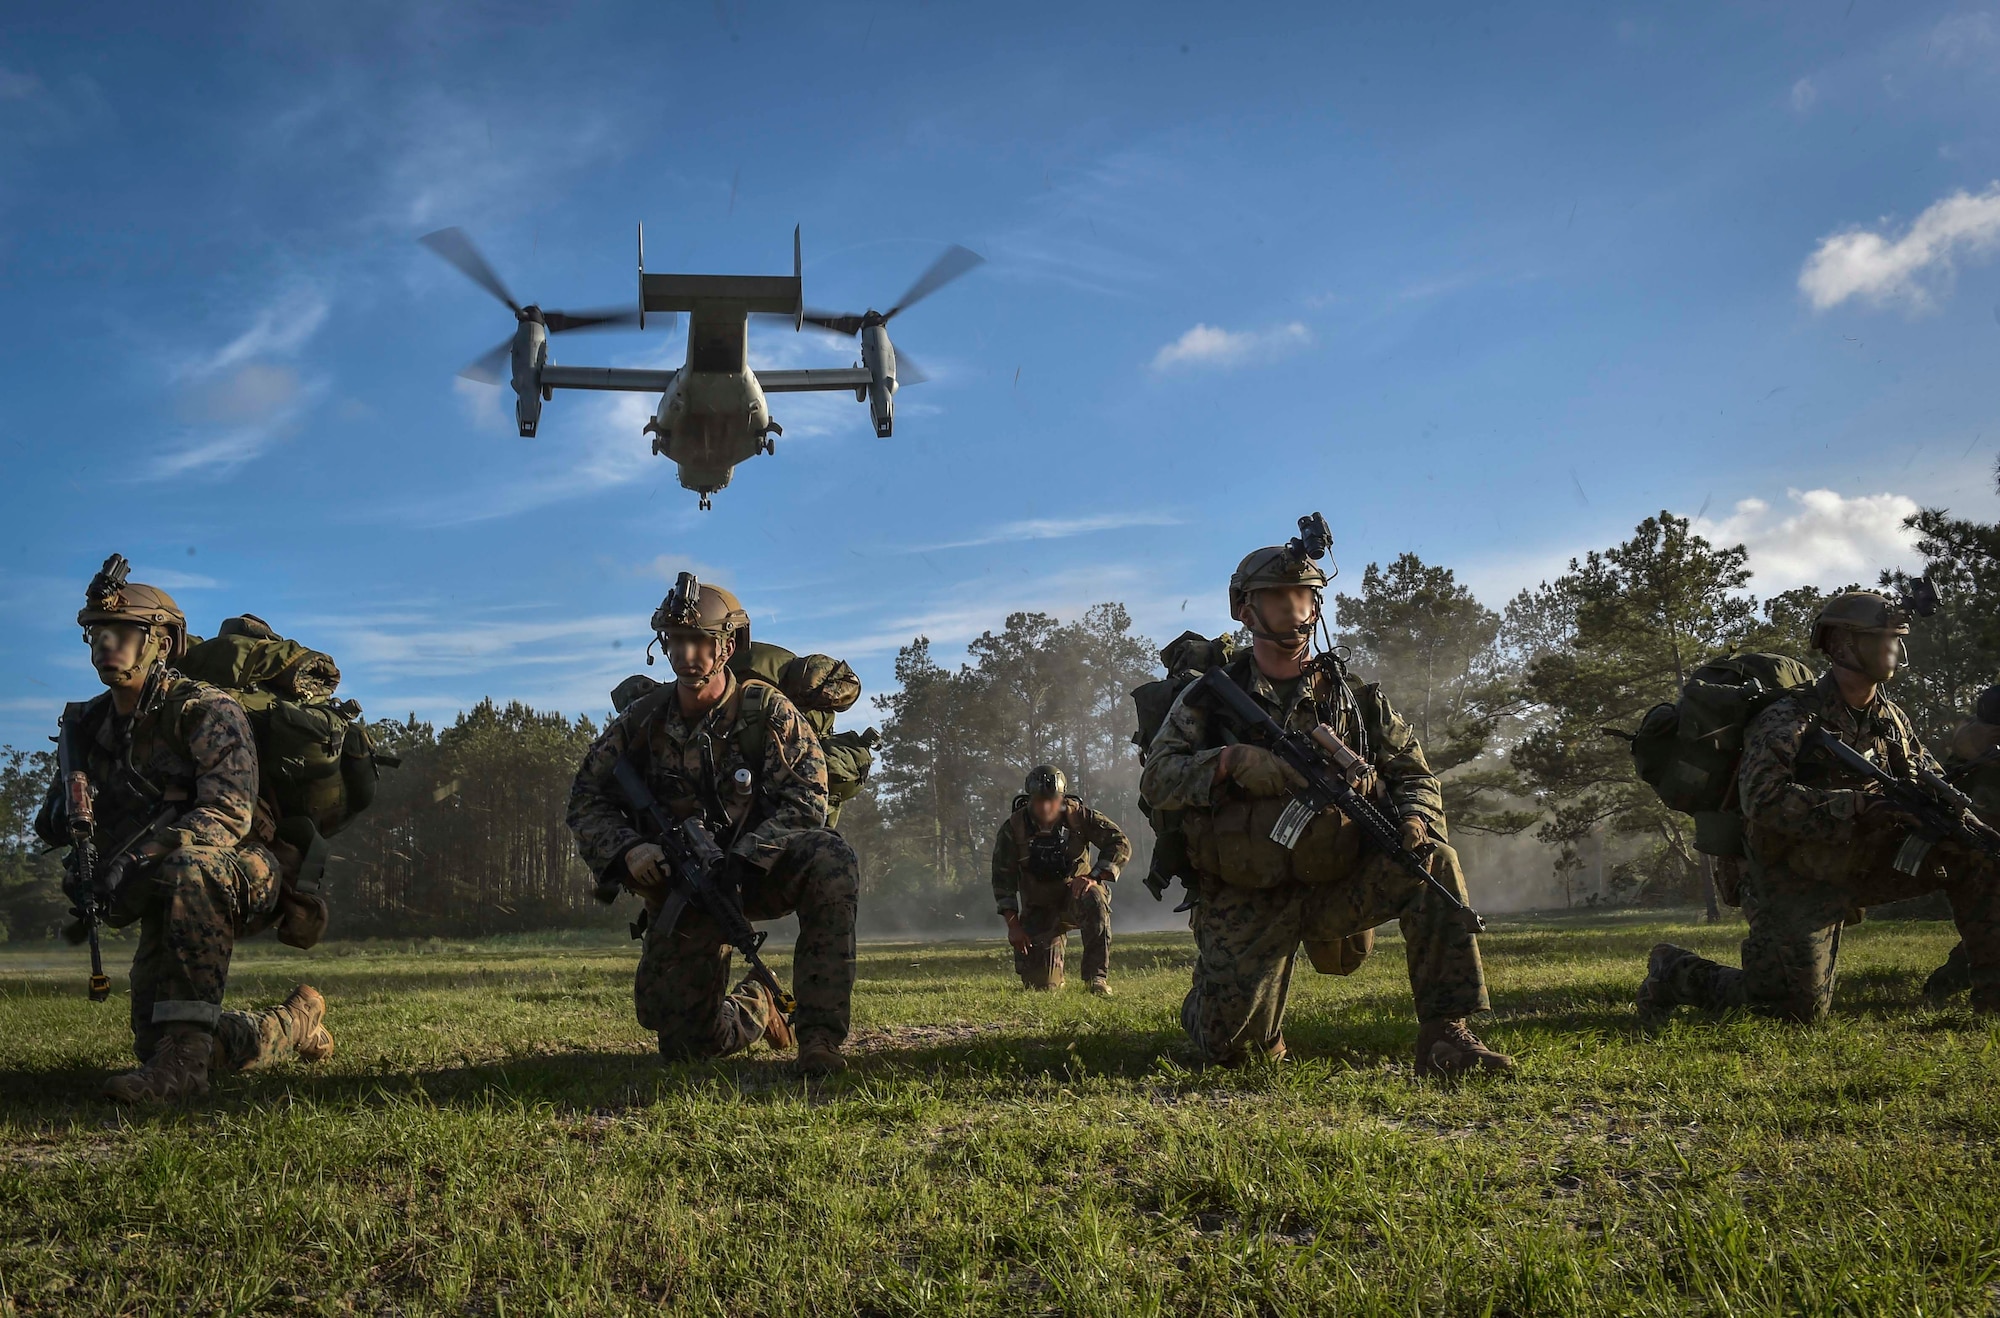 A U.S. Marine MV-22 Osprey takes off after Marine Special Operations School students infiltrate their objective during Field Training Exercise Raider Spirit, May 1, 2017, at Camp Lejeune, N.C. For the first time, U.S. Air Force Special Tactics Airmen spent three months in Marine Special Operations Command’s Marine Raider training pipeline, representing efforts to build joint mindsets across special operations forces.  (U.S. Air Force photo by Senior Airman Ryan Conroy)